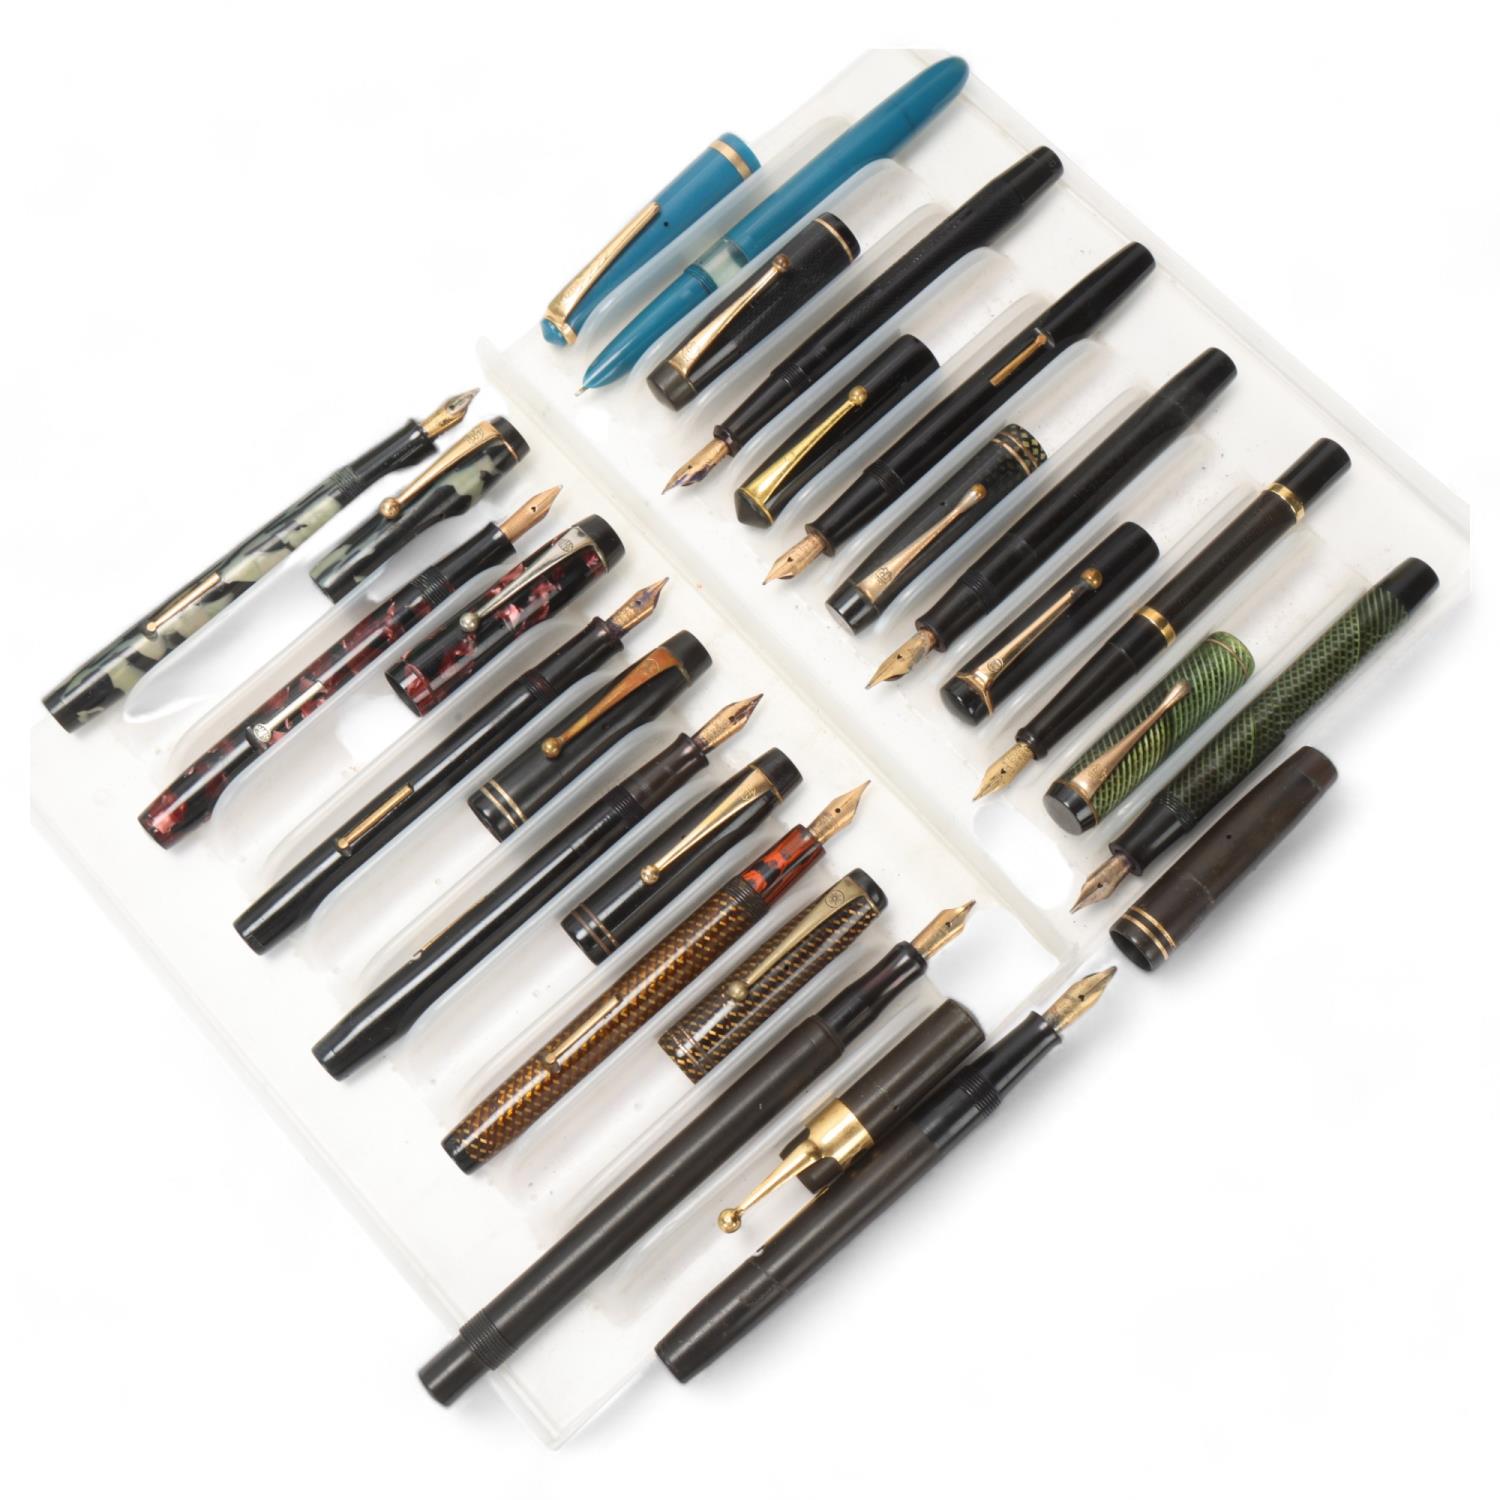 13 vintage De La Rue, Onoto fountain pens, from early 20th to mid 20th century, models, include